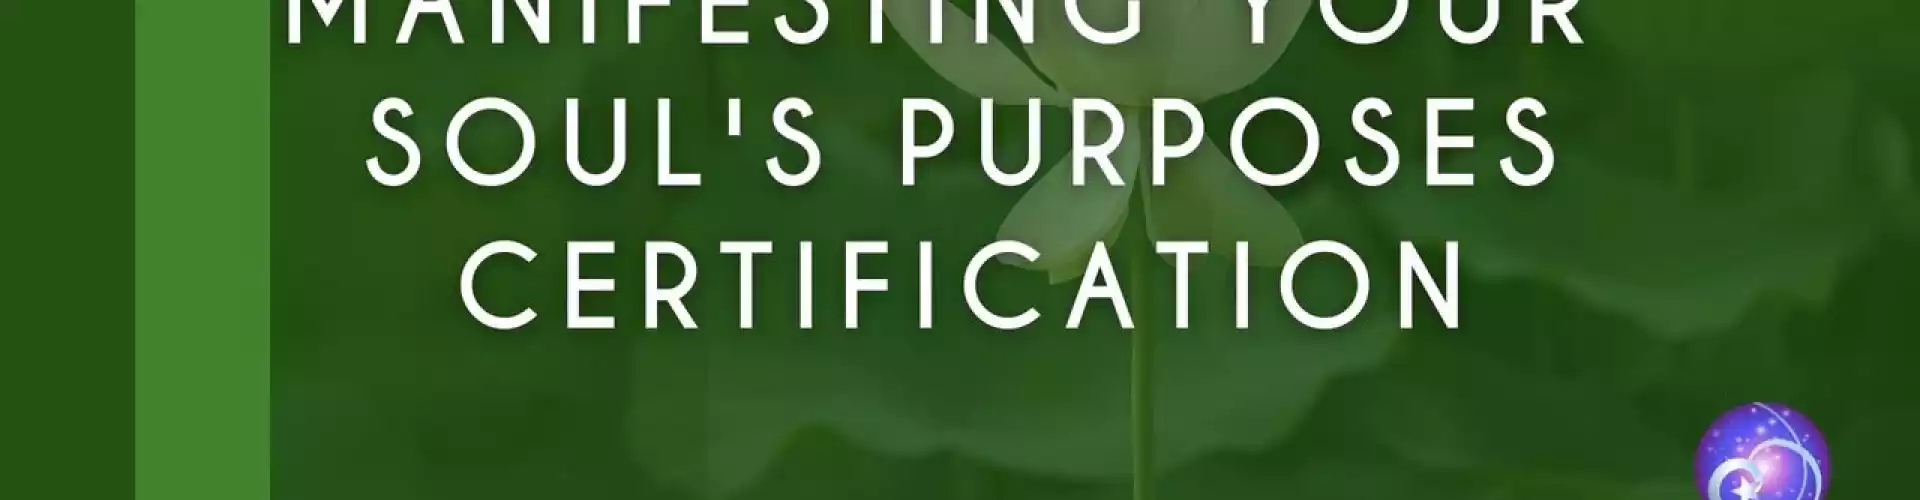 Manifesting Your Soul"s Purposes Certification